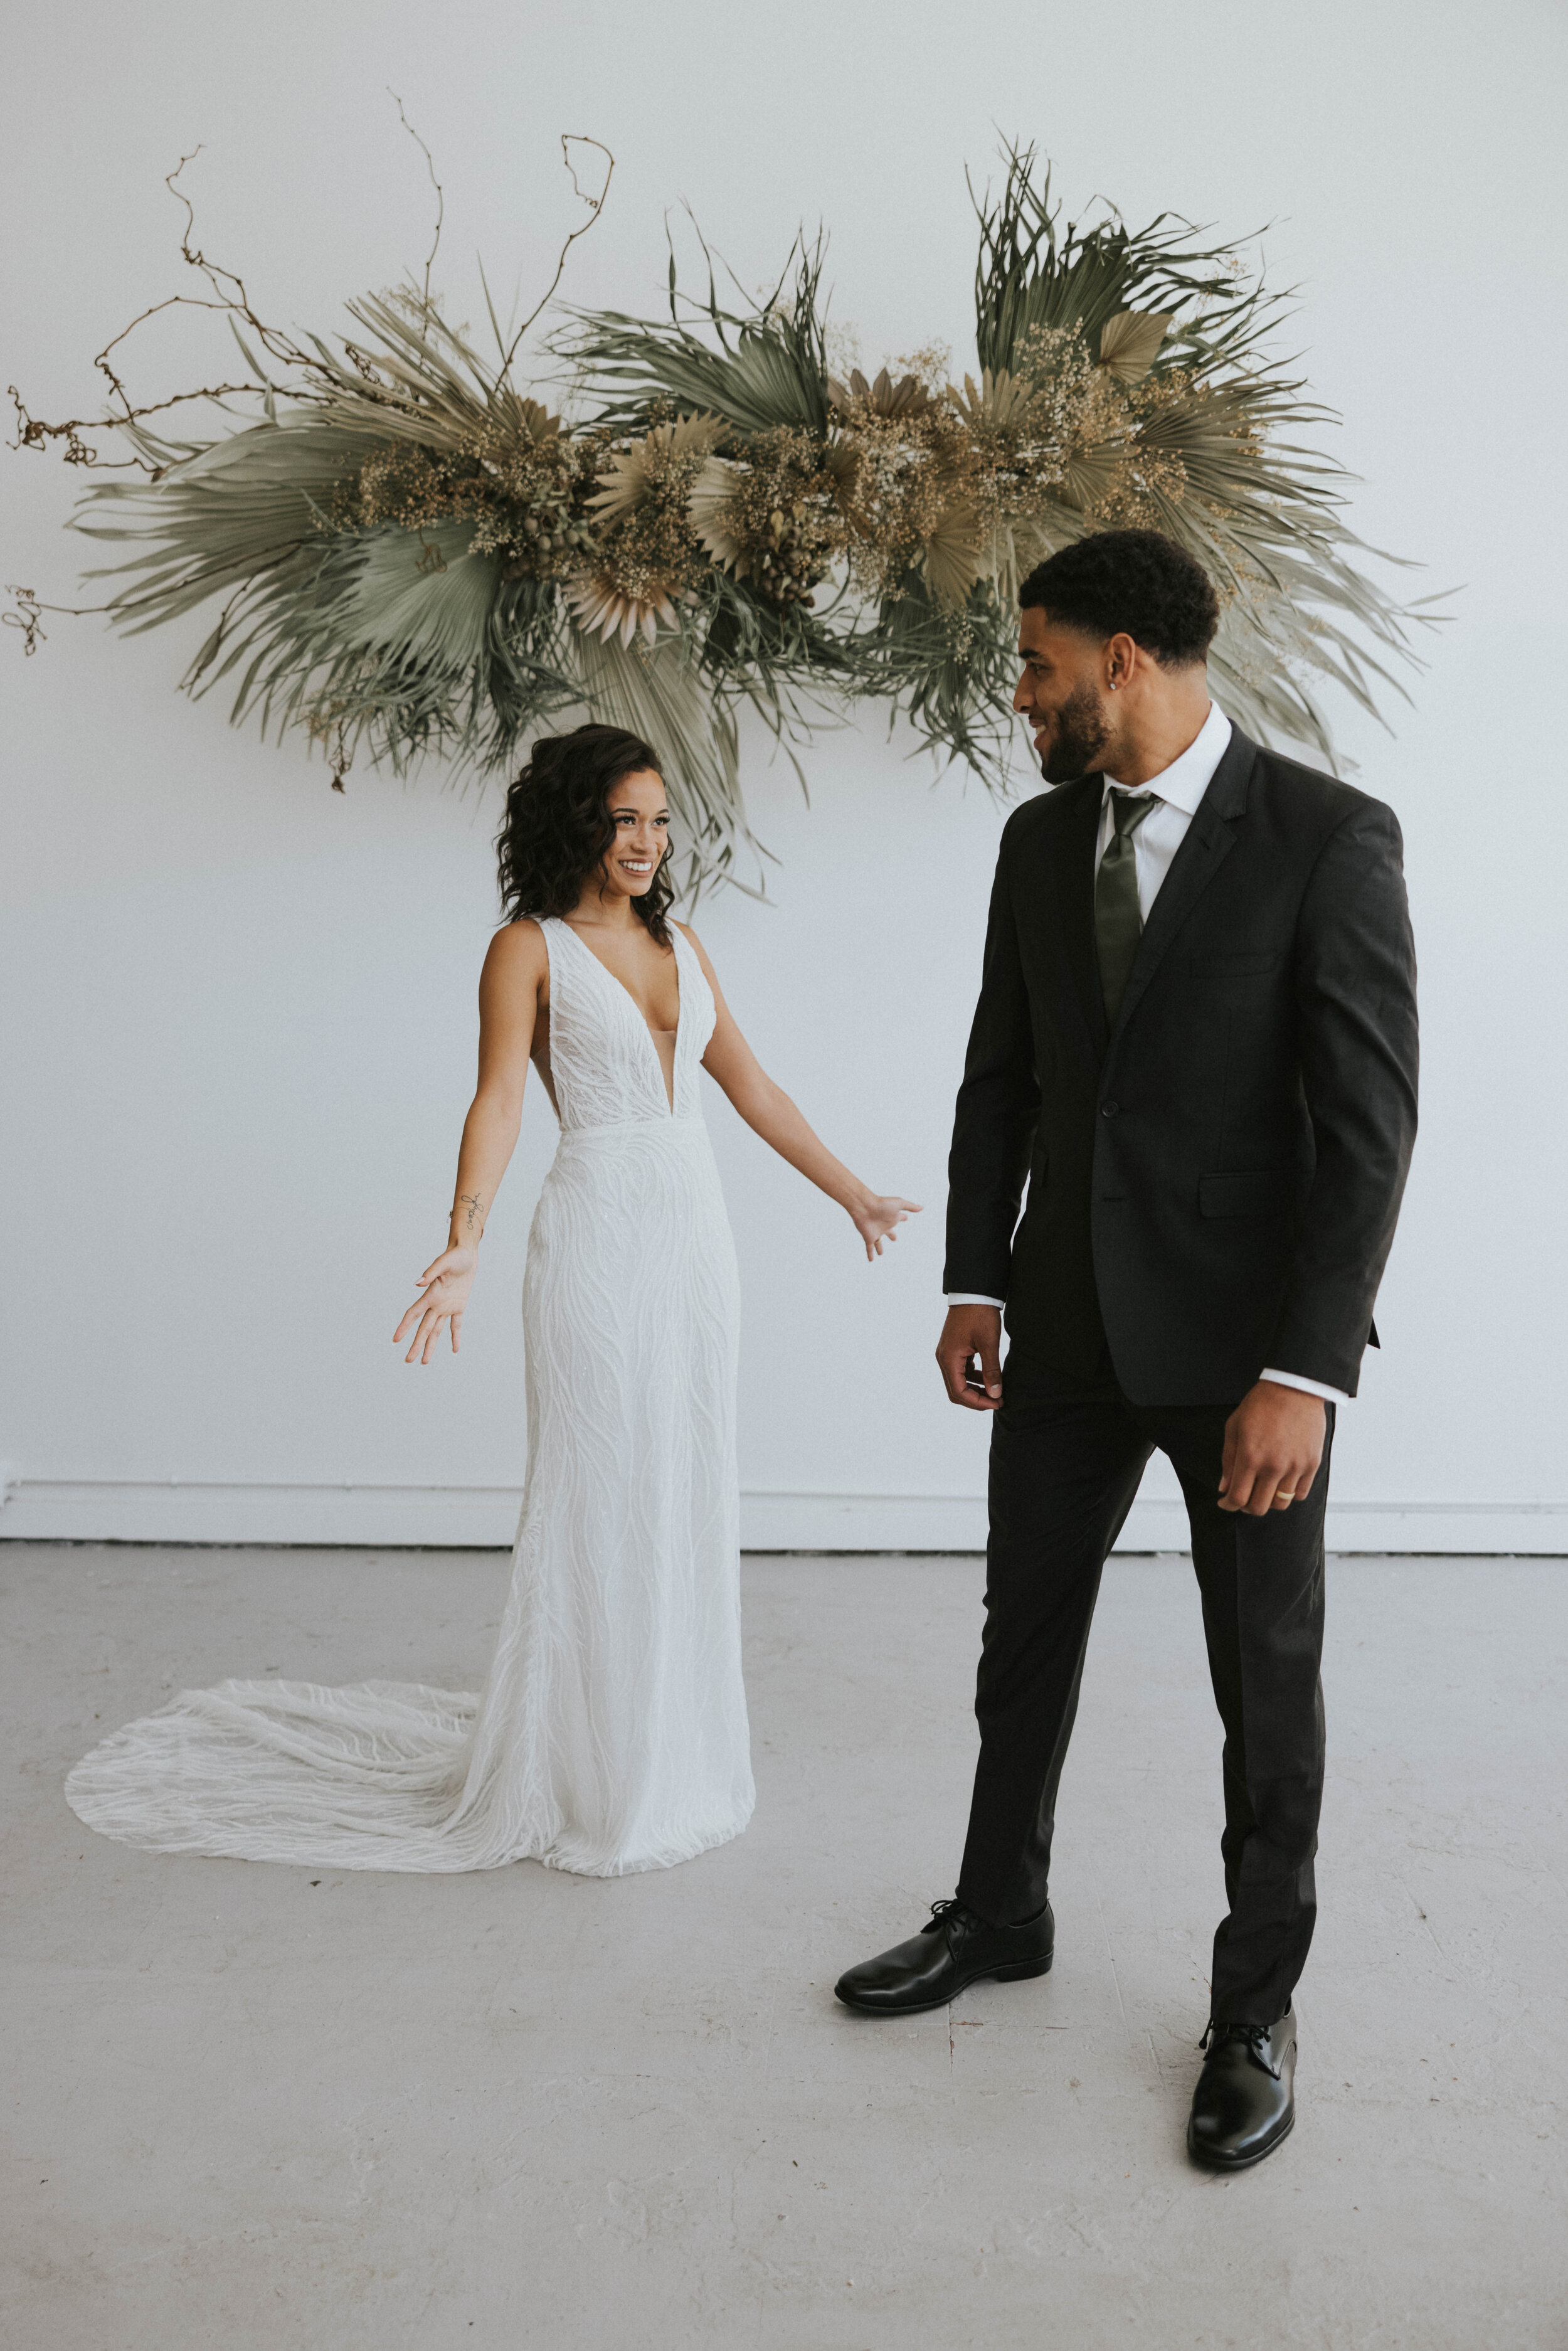  Modern styled wedding shoot in Made with Love Ryder wedding dress at 210 Studio + Events in Seattle, Washington. 